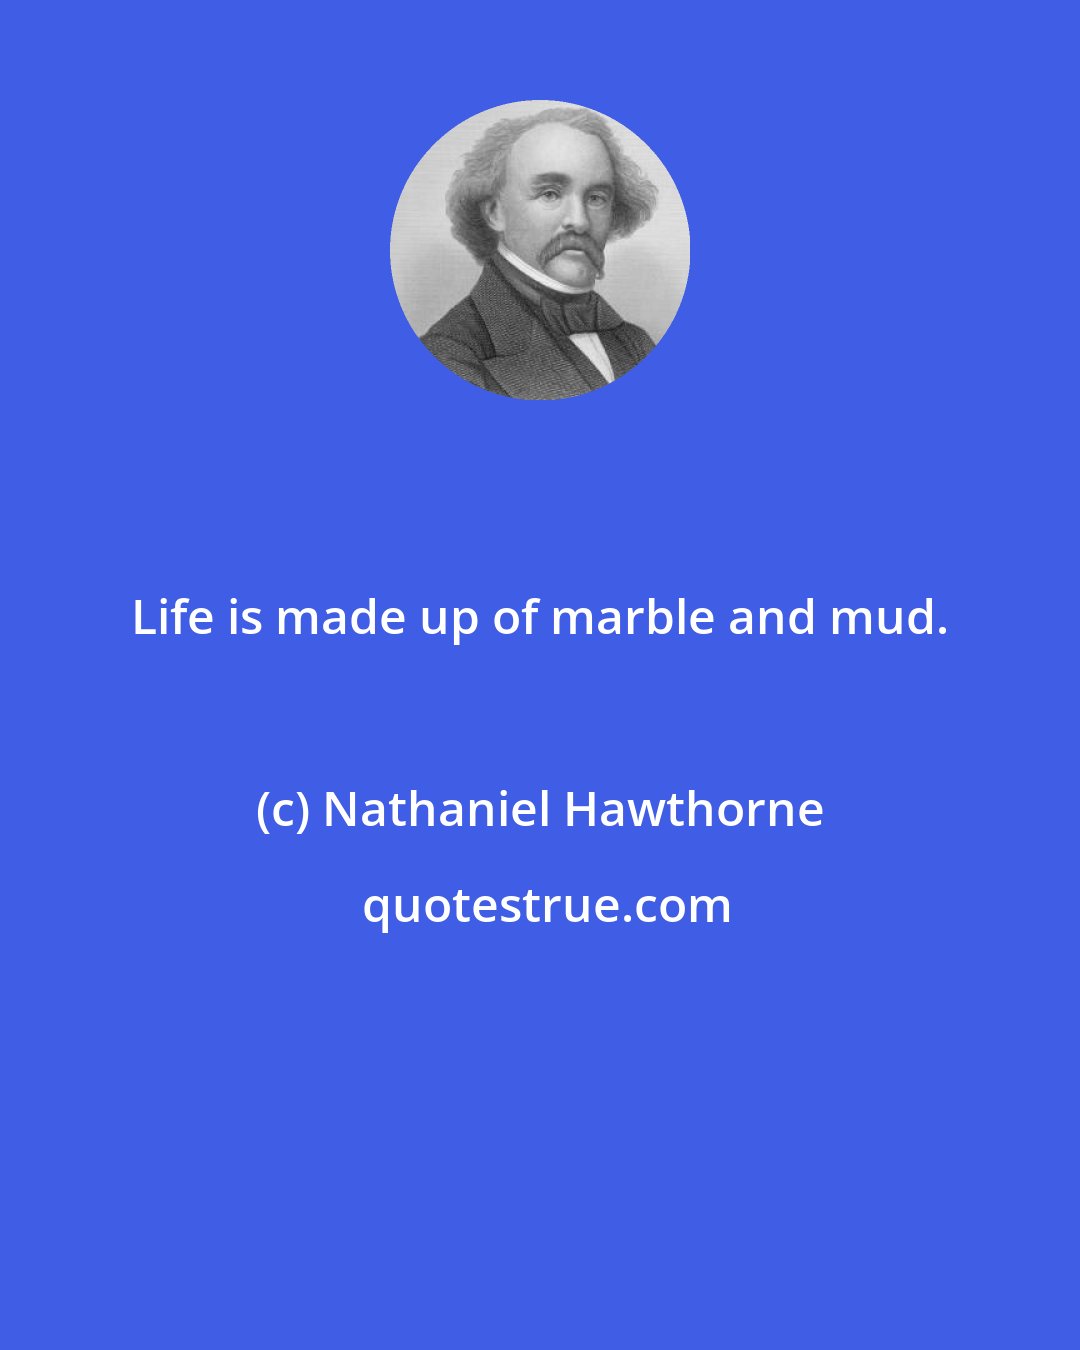 Nathaniel Hawthorne: Life is made up of marble and mud.